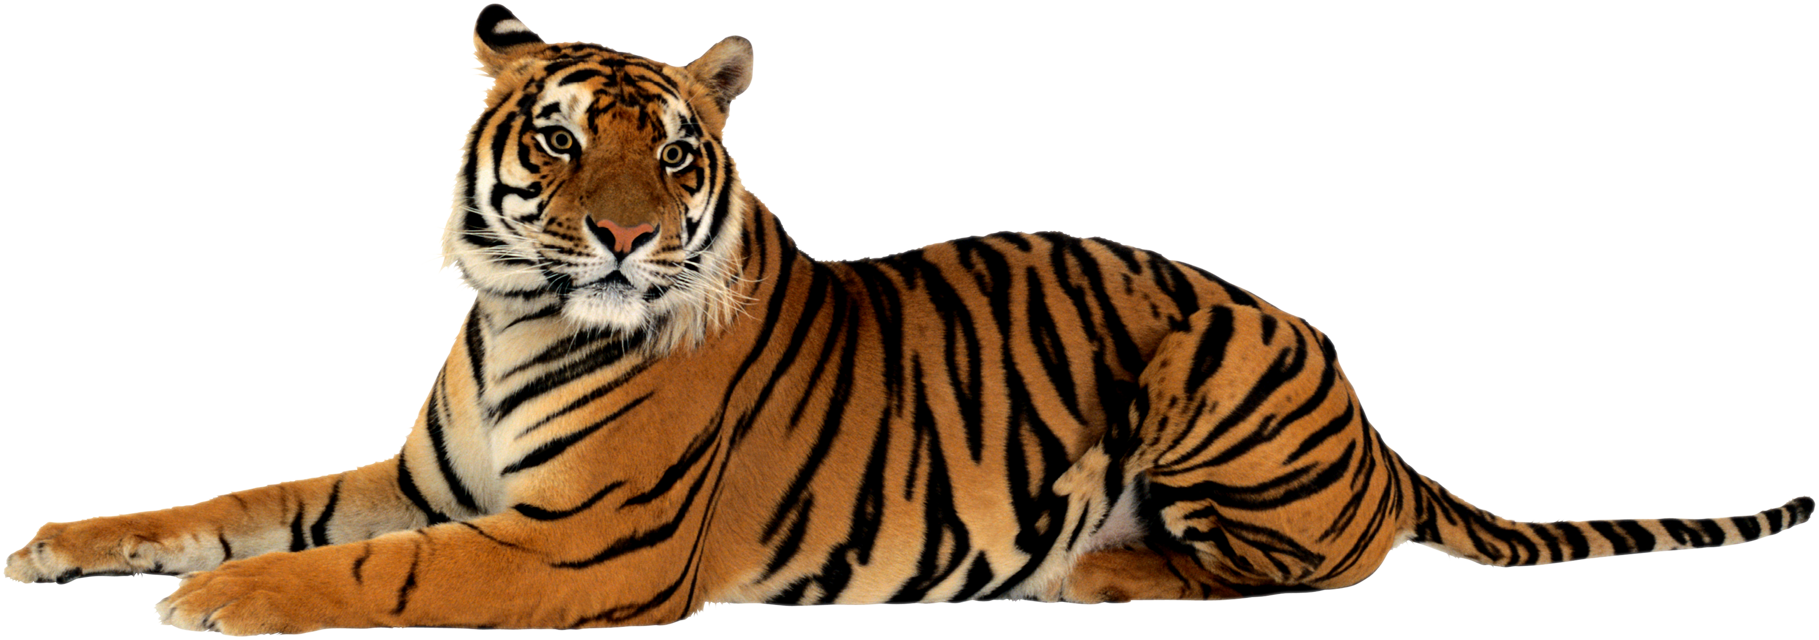 Tiger Png Hd Quality - Tiger, Transparent background PNG HD thumbnail